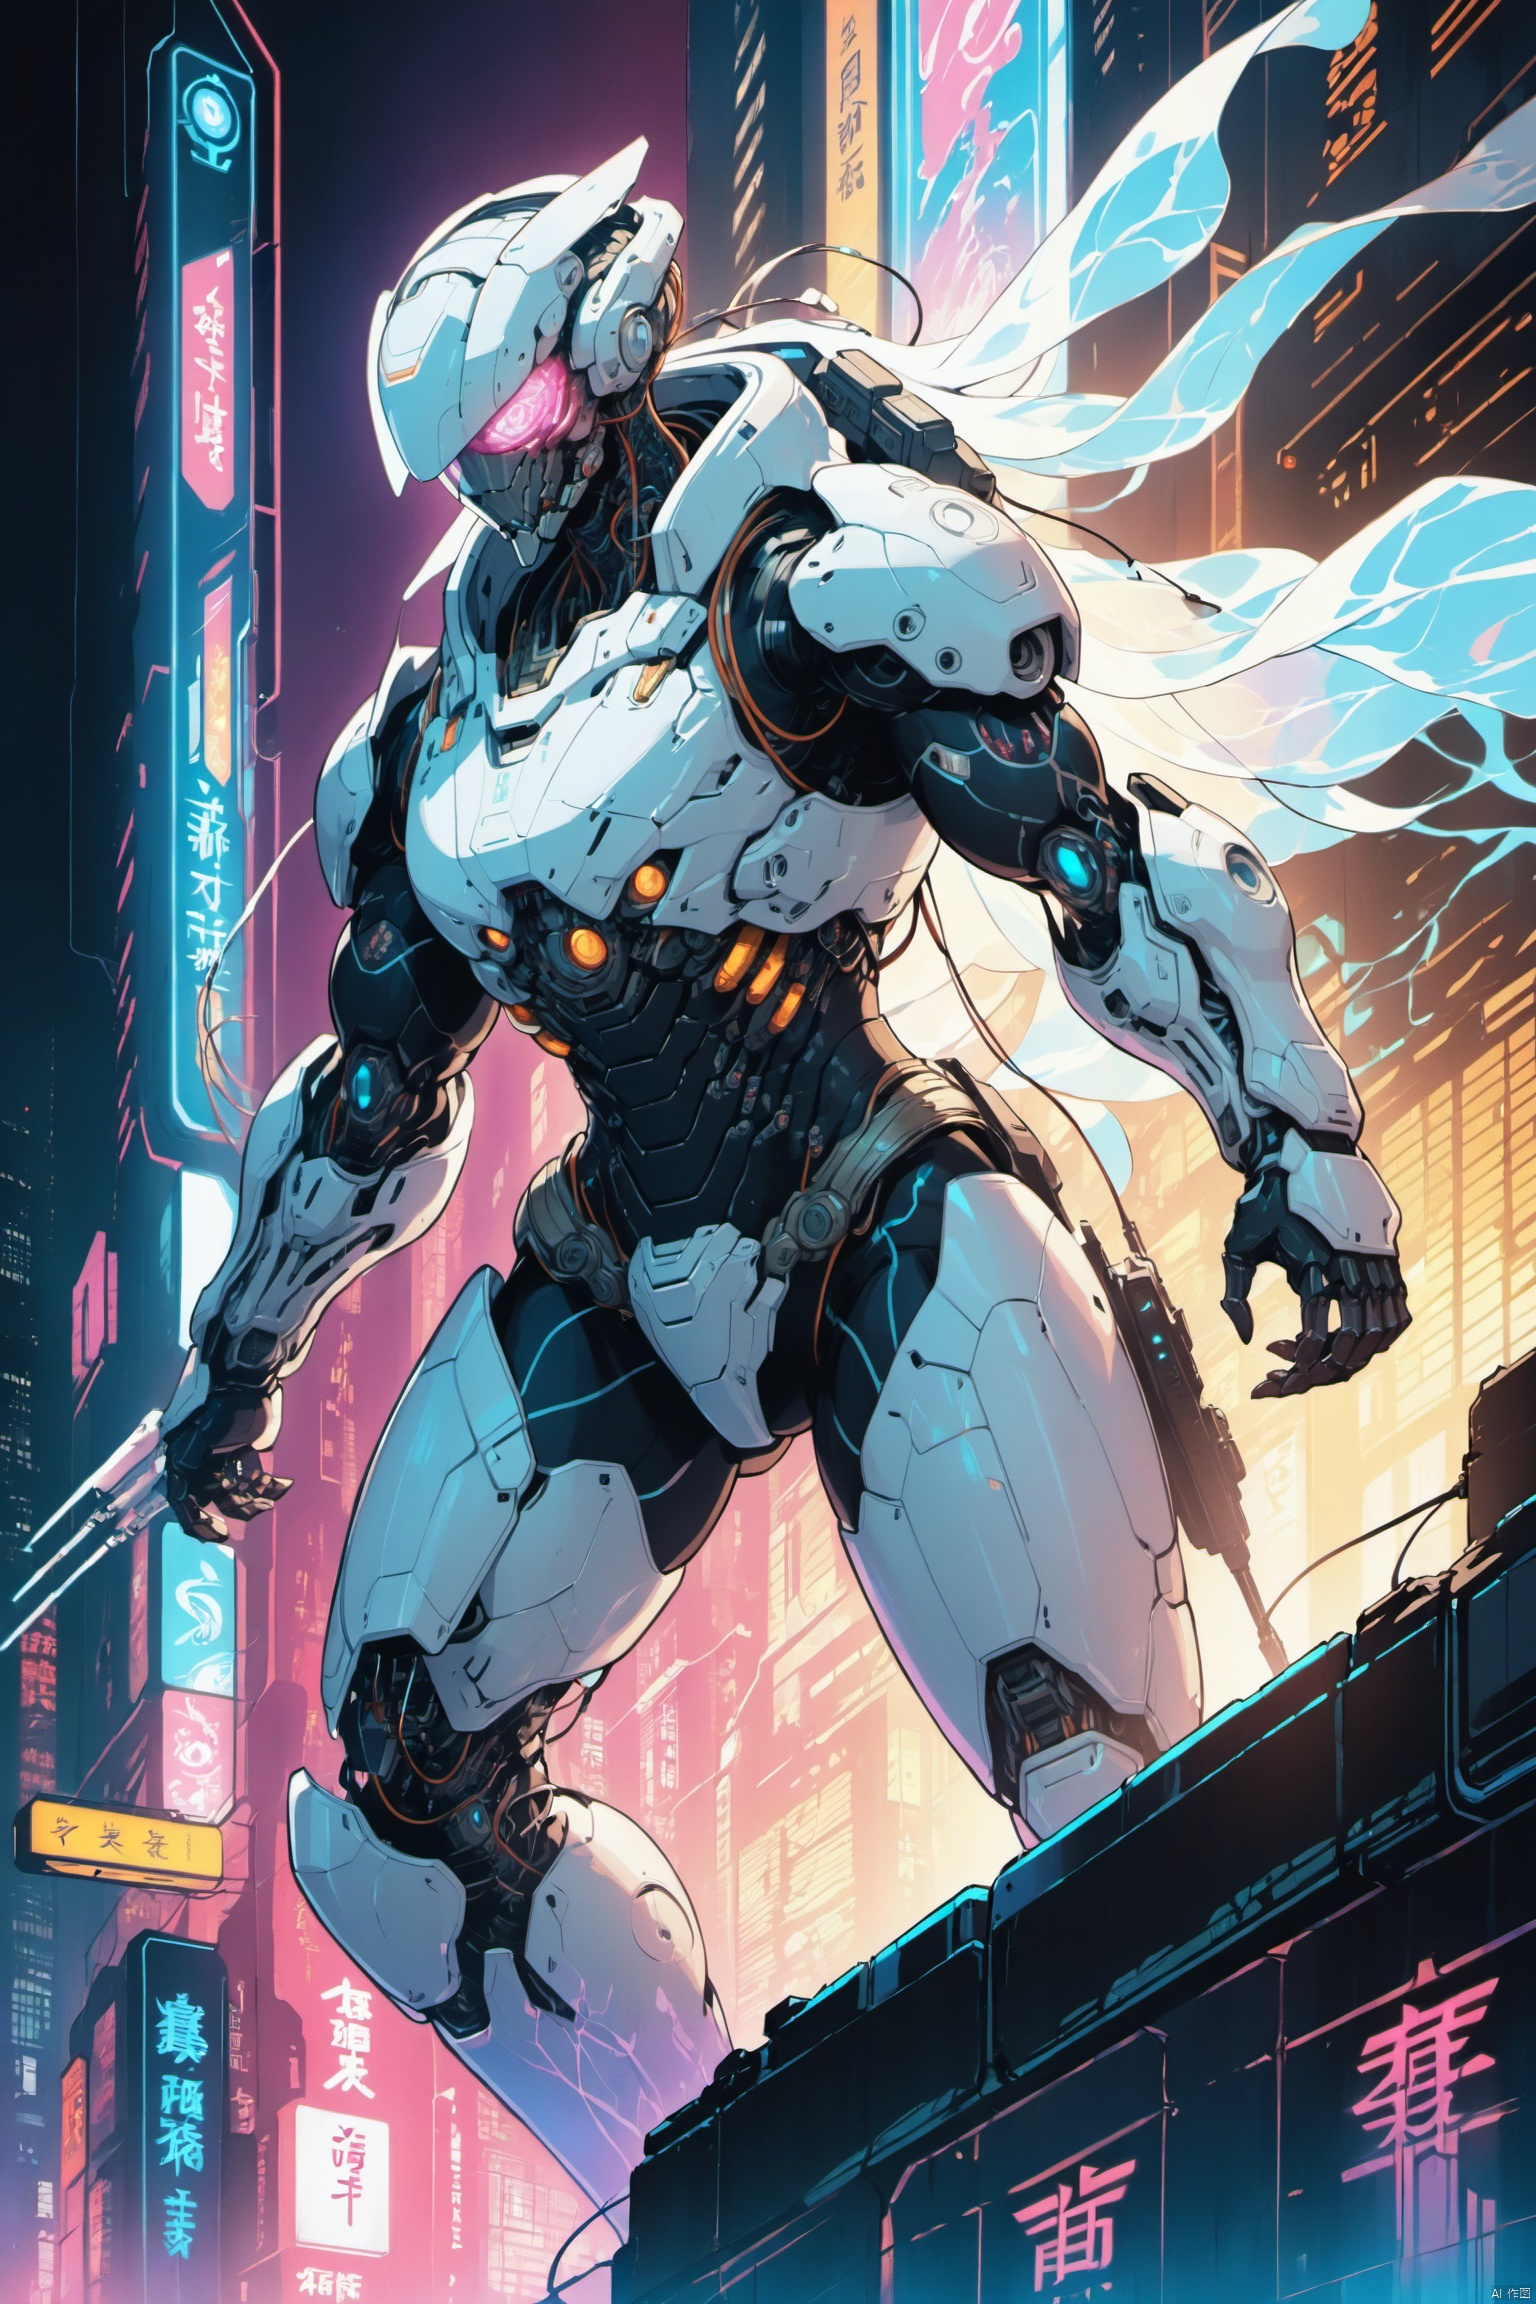 1cyborg character reminiscent of Ghost in the Shell, full-body visual, seamless integration of organic and mechanical components, highly advanced prosthetic limbs showcasing versatility and strength, translucent synthetic skin revealing intricate wiring and micro-machinery, glowing optic nerve interfaces connecting to a neural implant, tactical body armor embedded with adaptable camouflage technology, retractable tactical blades concealed within the anatomy, augmented sensory enhancements like thermographic vision, sleek and streamlined design, balancing both human and machine aesthetics, set against a futuristic metropolis backdrop illuminated by neon lights and holographic advertisements, representing the blurred lines between humanity and technology in a cyberpunk universe,((anime art style)), ((poakl)), eastern mythology